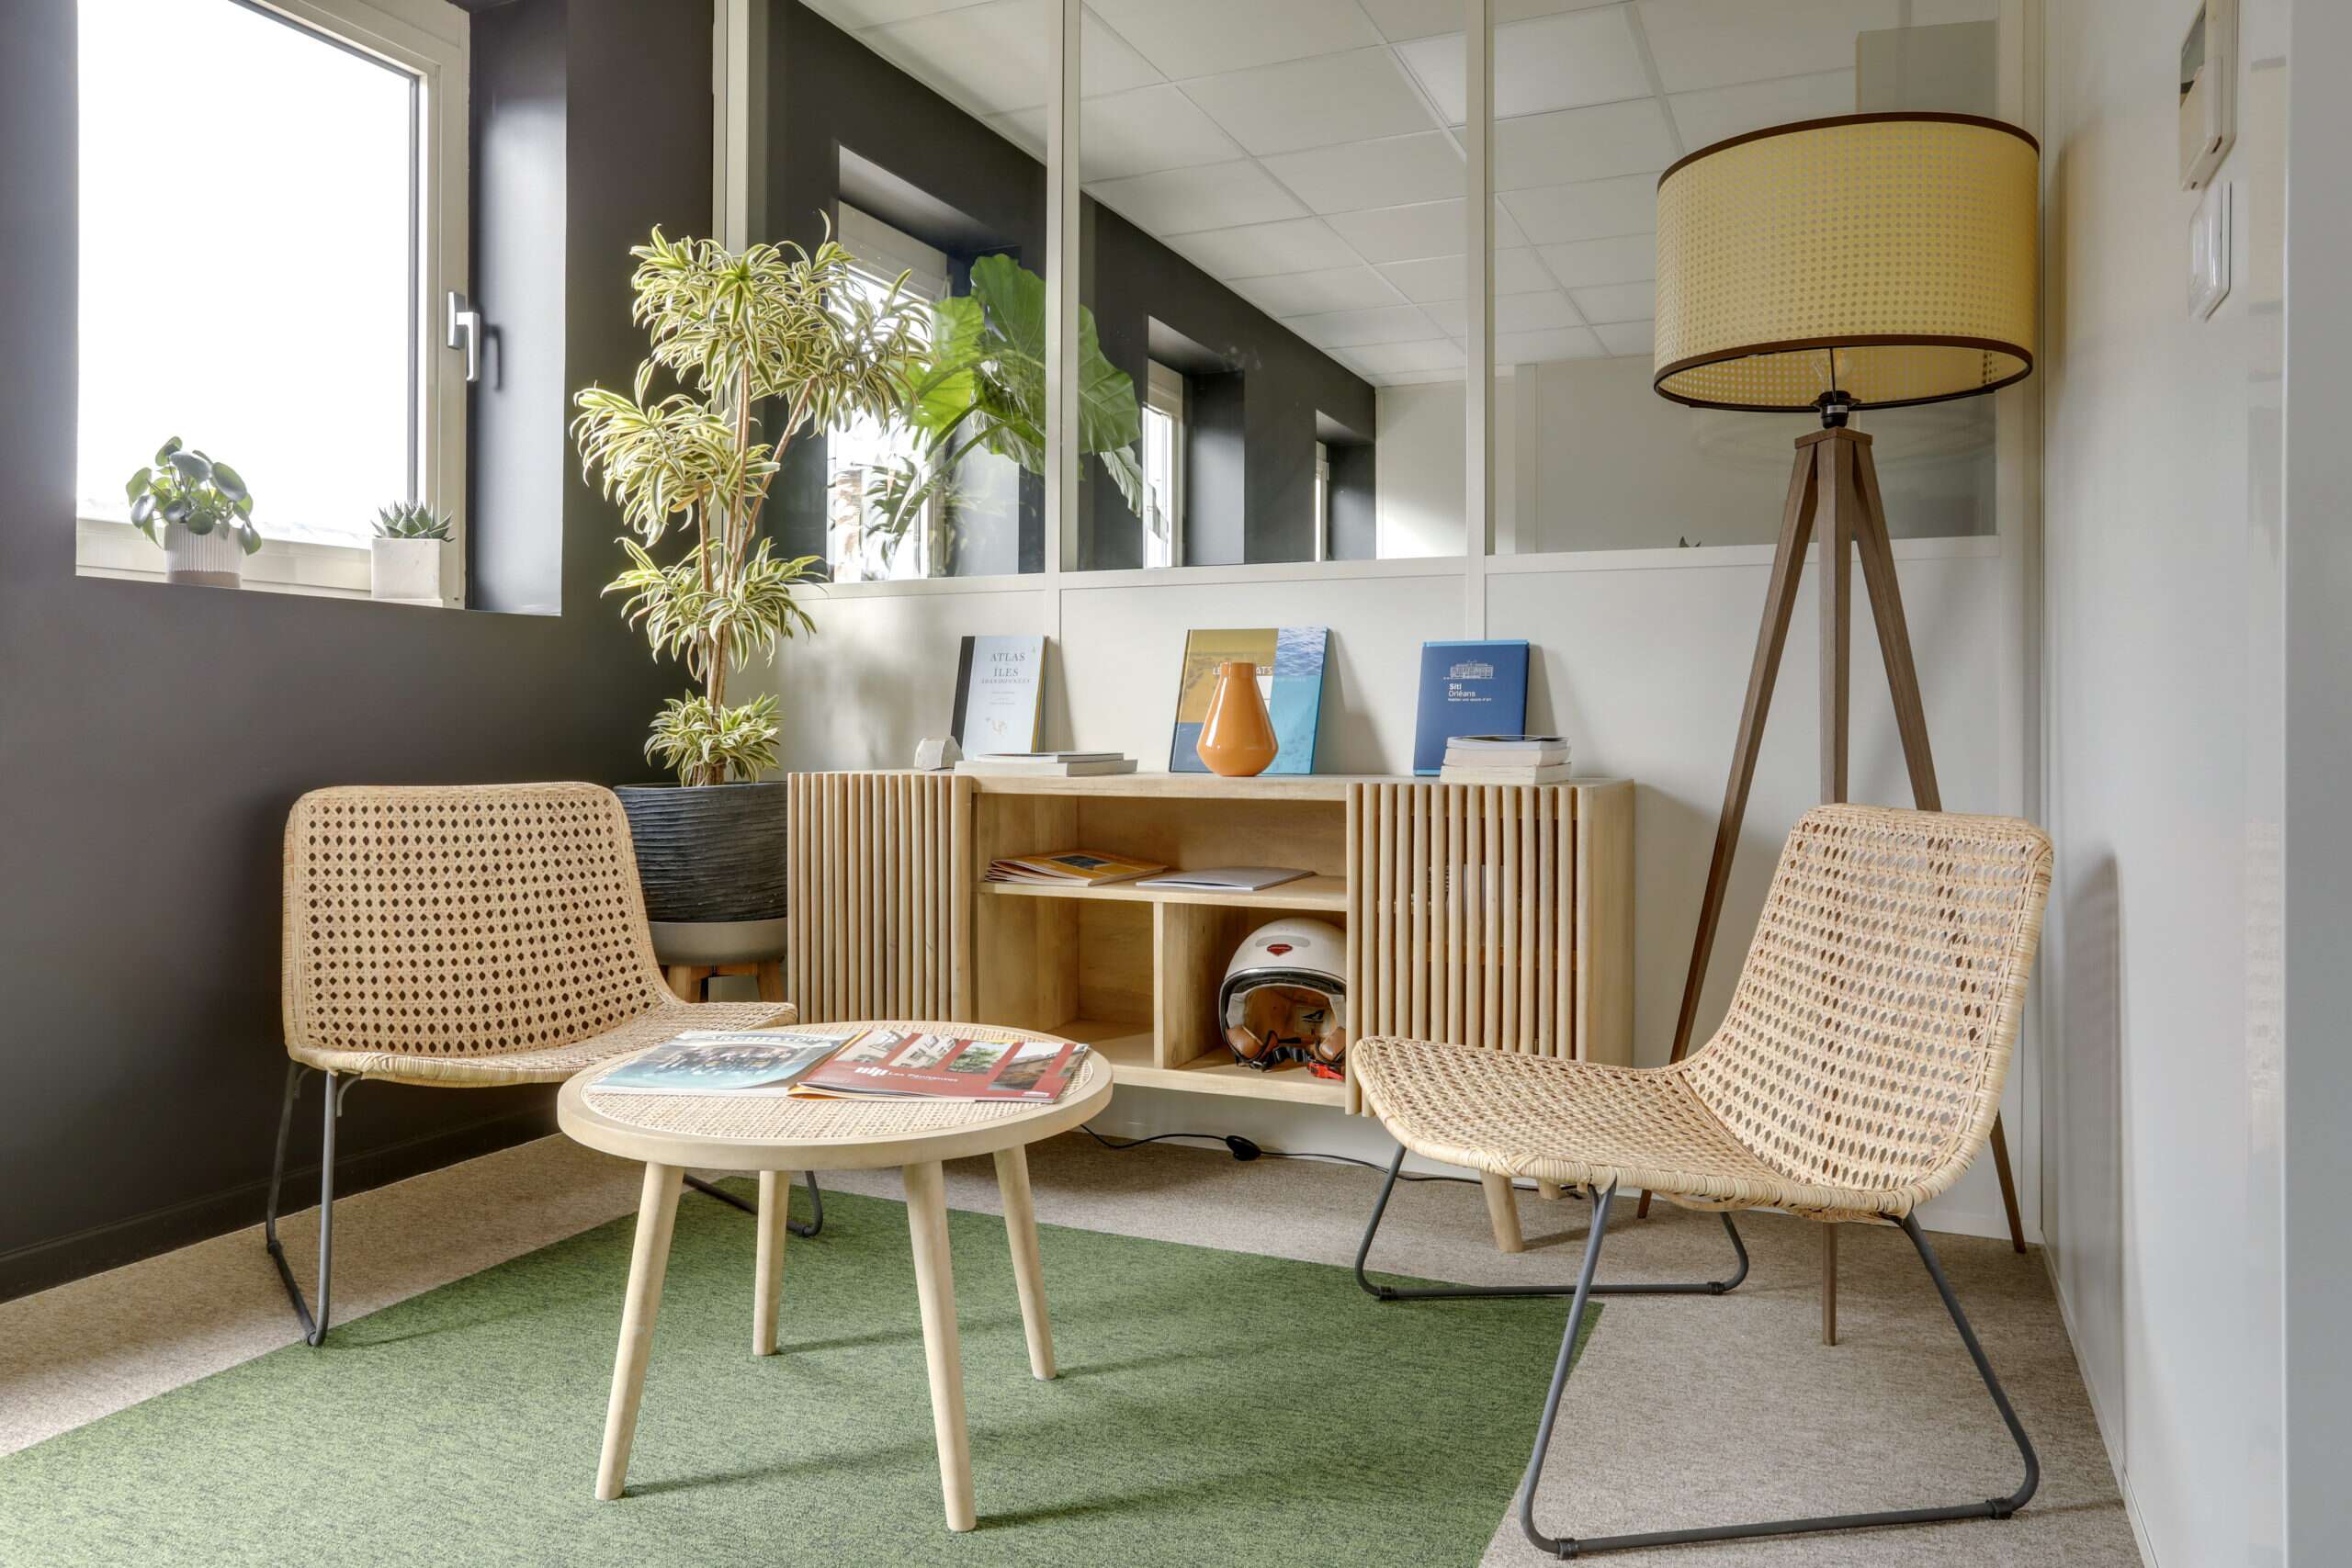 Timbers, rattans and natural colours bring people closer to nature at the Altarea Cogedim offices in Lille, France